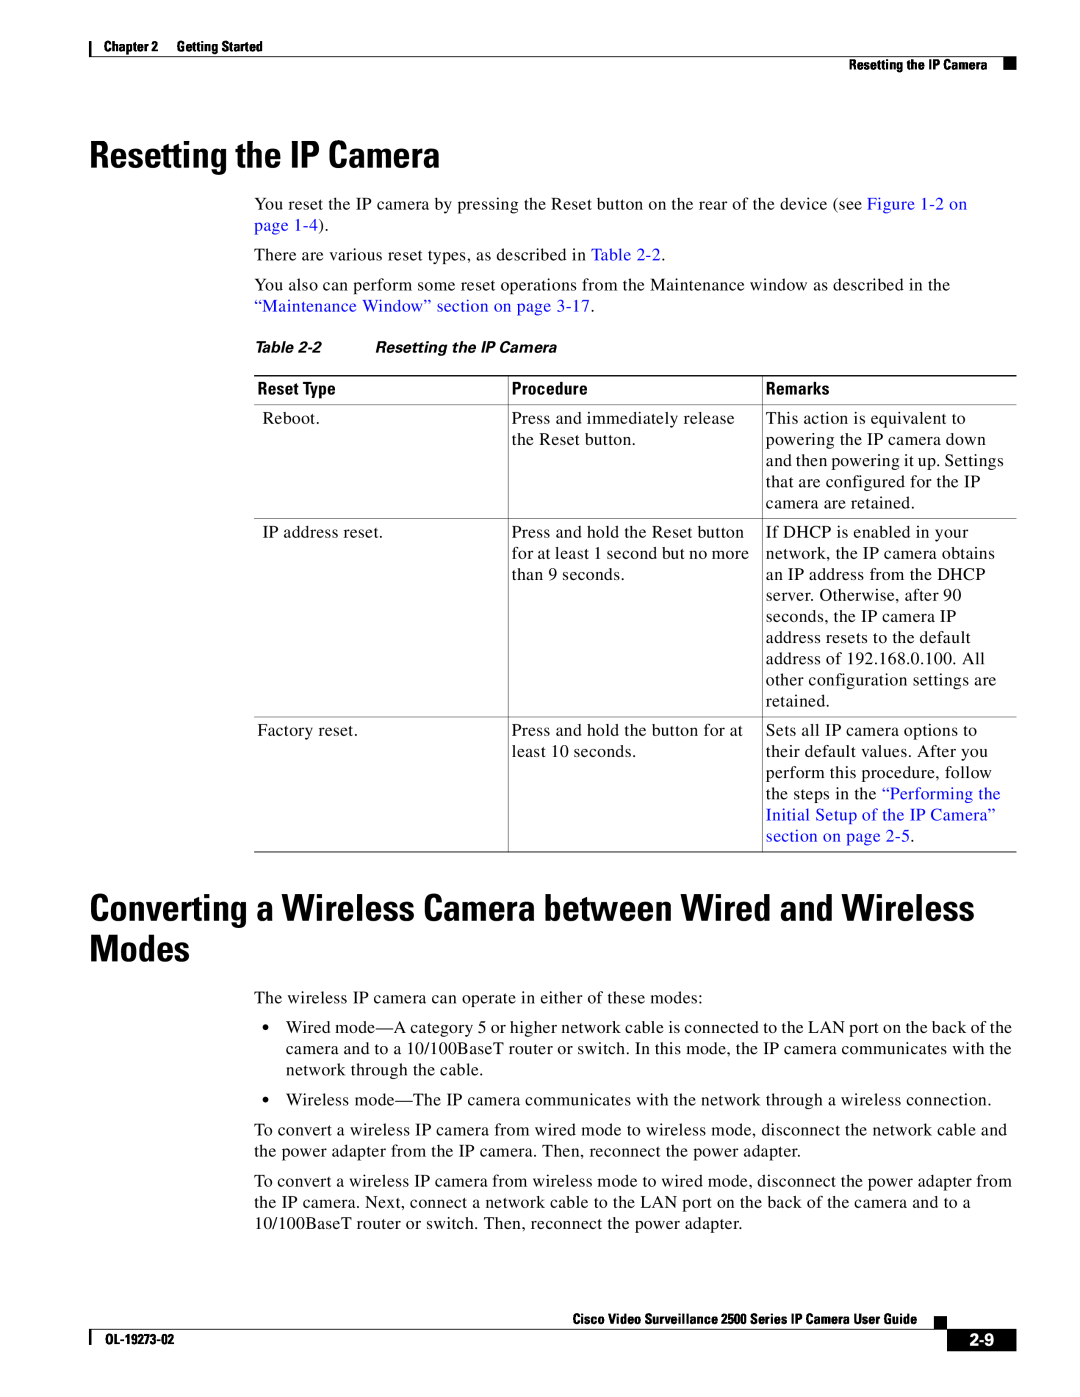 Cisco Systems CIVS-IPC-2500 manual Resetting the IP Camera, Converting a Wireless Camera between Wired and Wireless Modes 